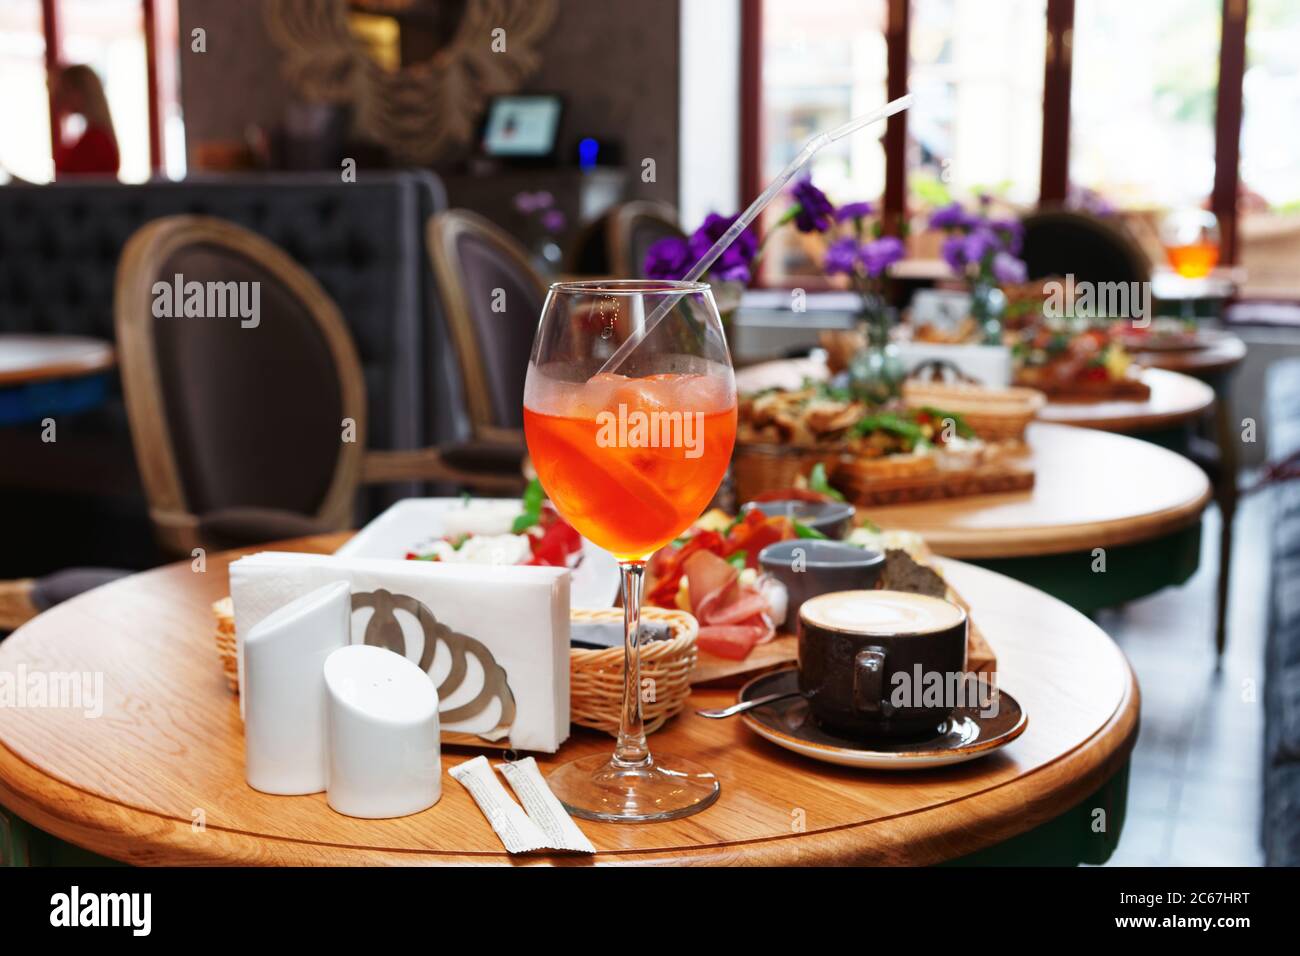 Spritz fizz cocktail and various Italian food on restaurant table, toned Stock Photo